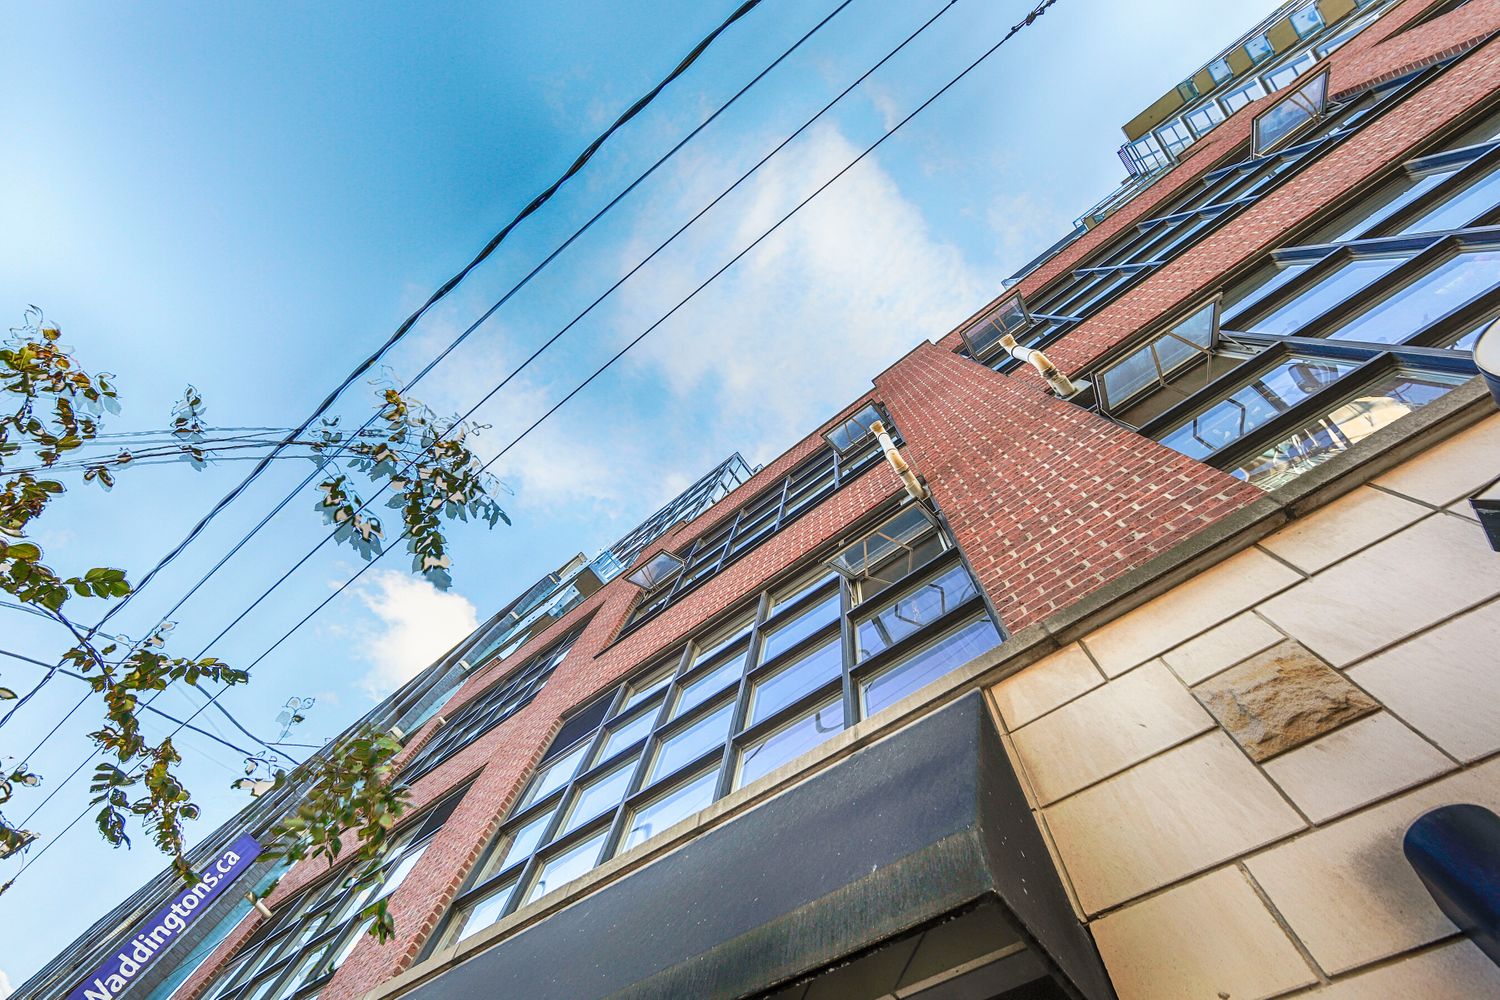 261 King Street E. Abbey Lane Lofts is located in  Downtown, Toronto - image #4 of 5